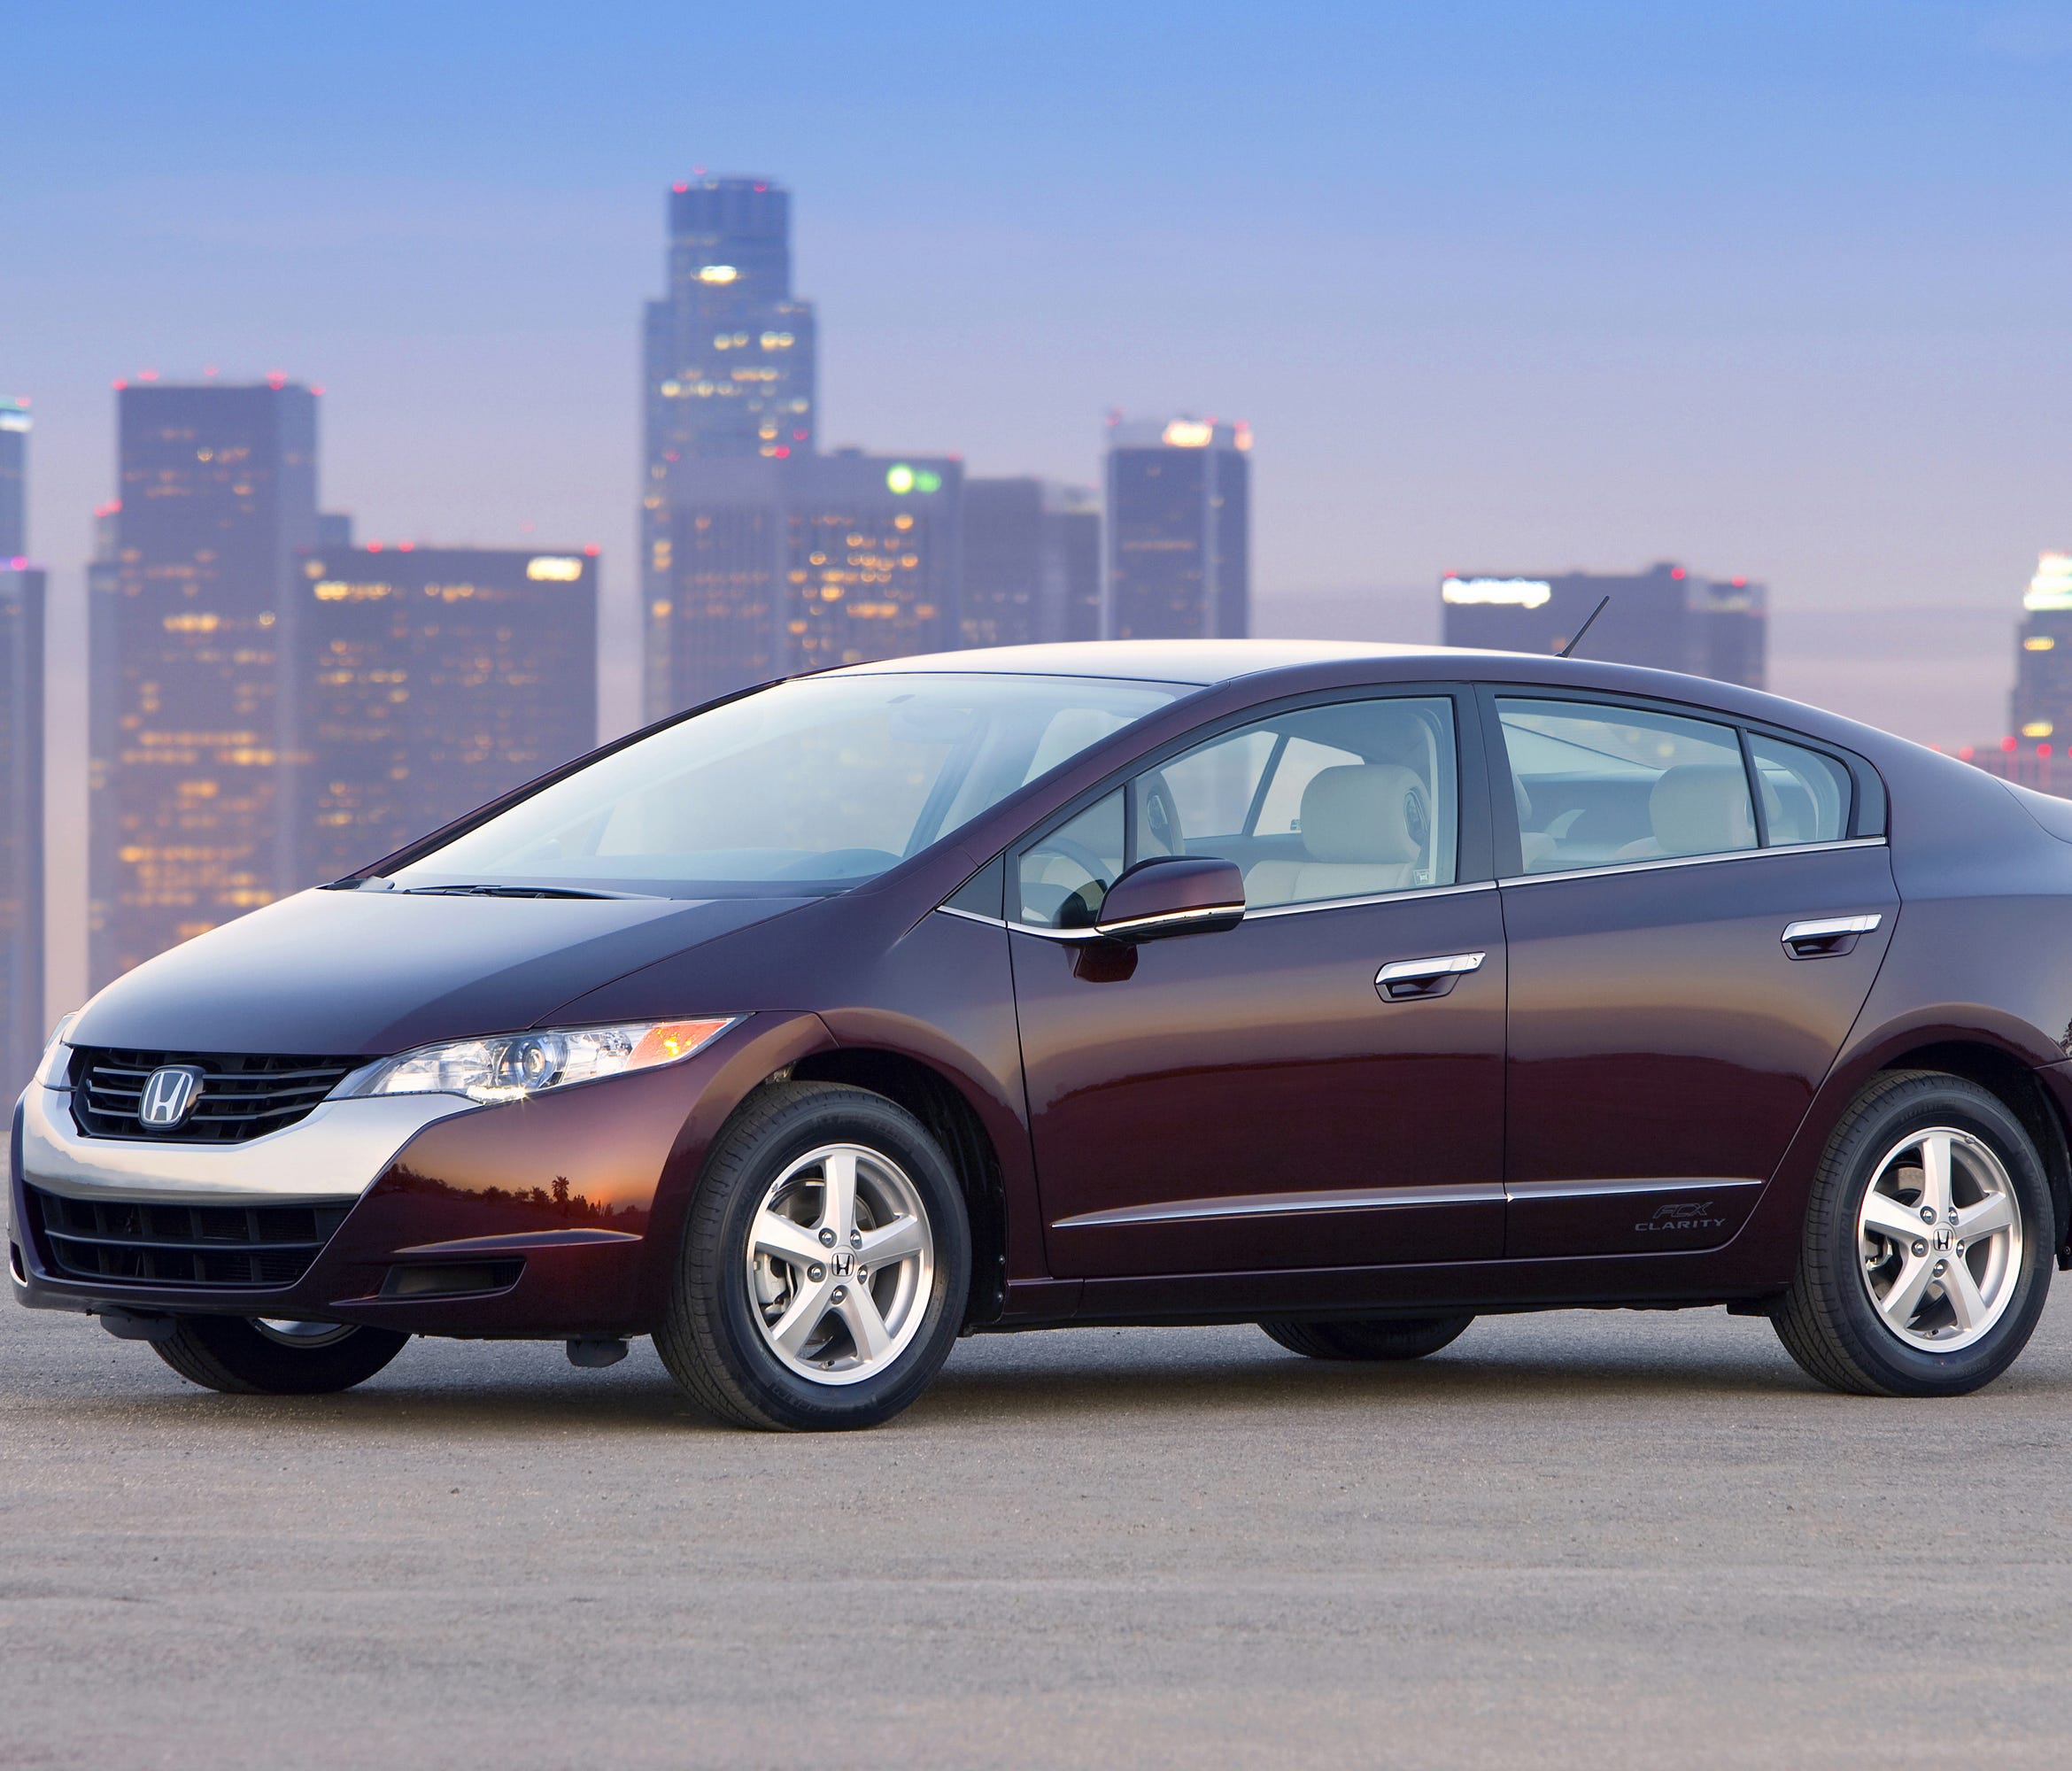 The 2009 Honda FCX Clarity had a hydrogen fuel cell.